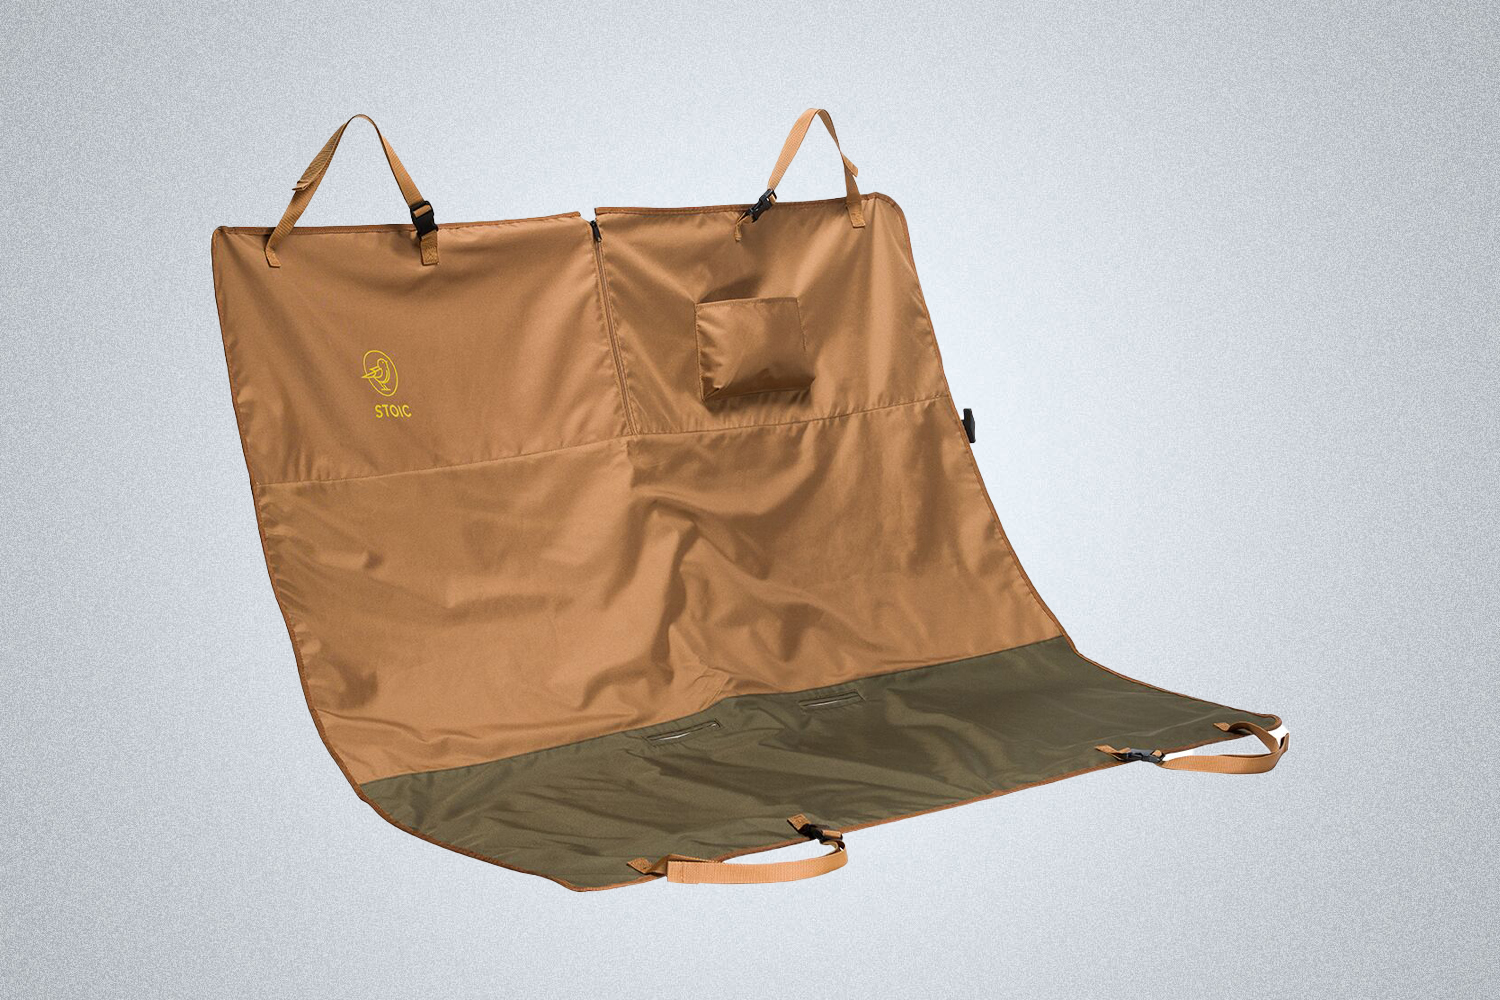 The Stoic Pet Backseat Hammock in brown and green from Backcountry's sitewide Memorial Day Sale